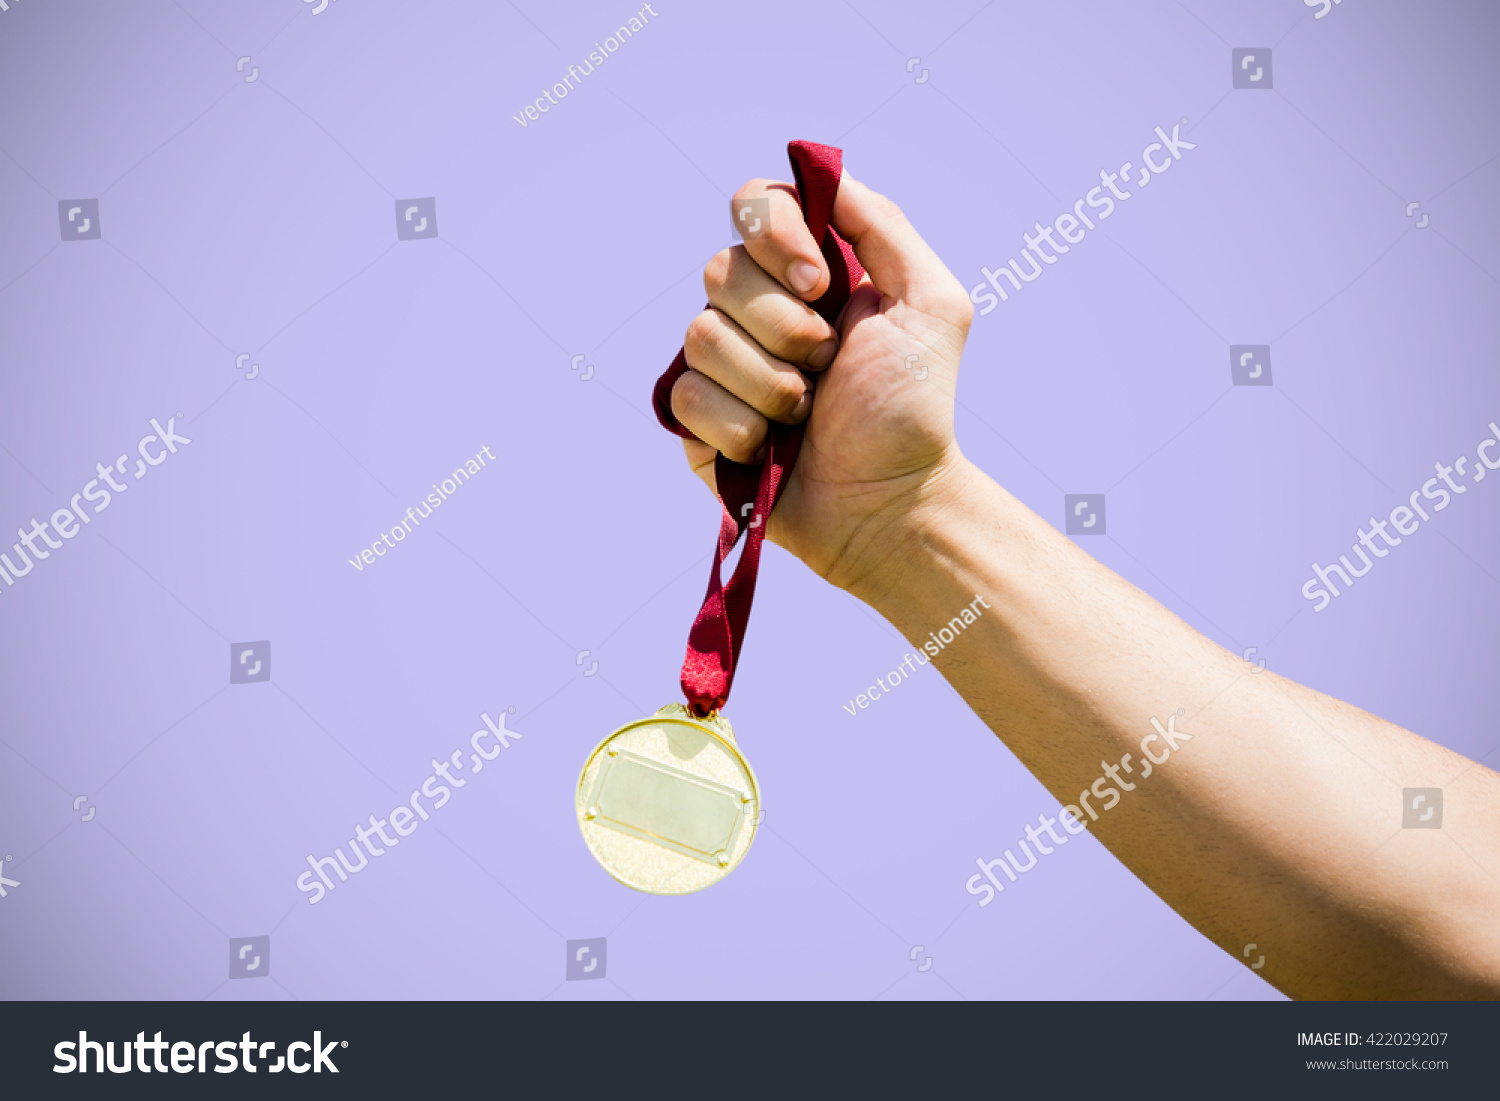 Hand holding a gold medal on white background against purple background #422029207